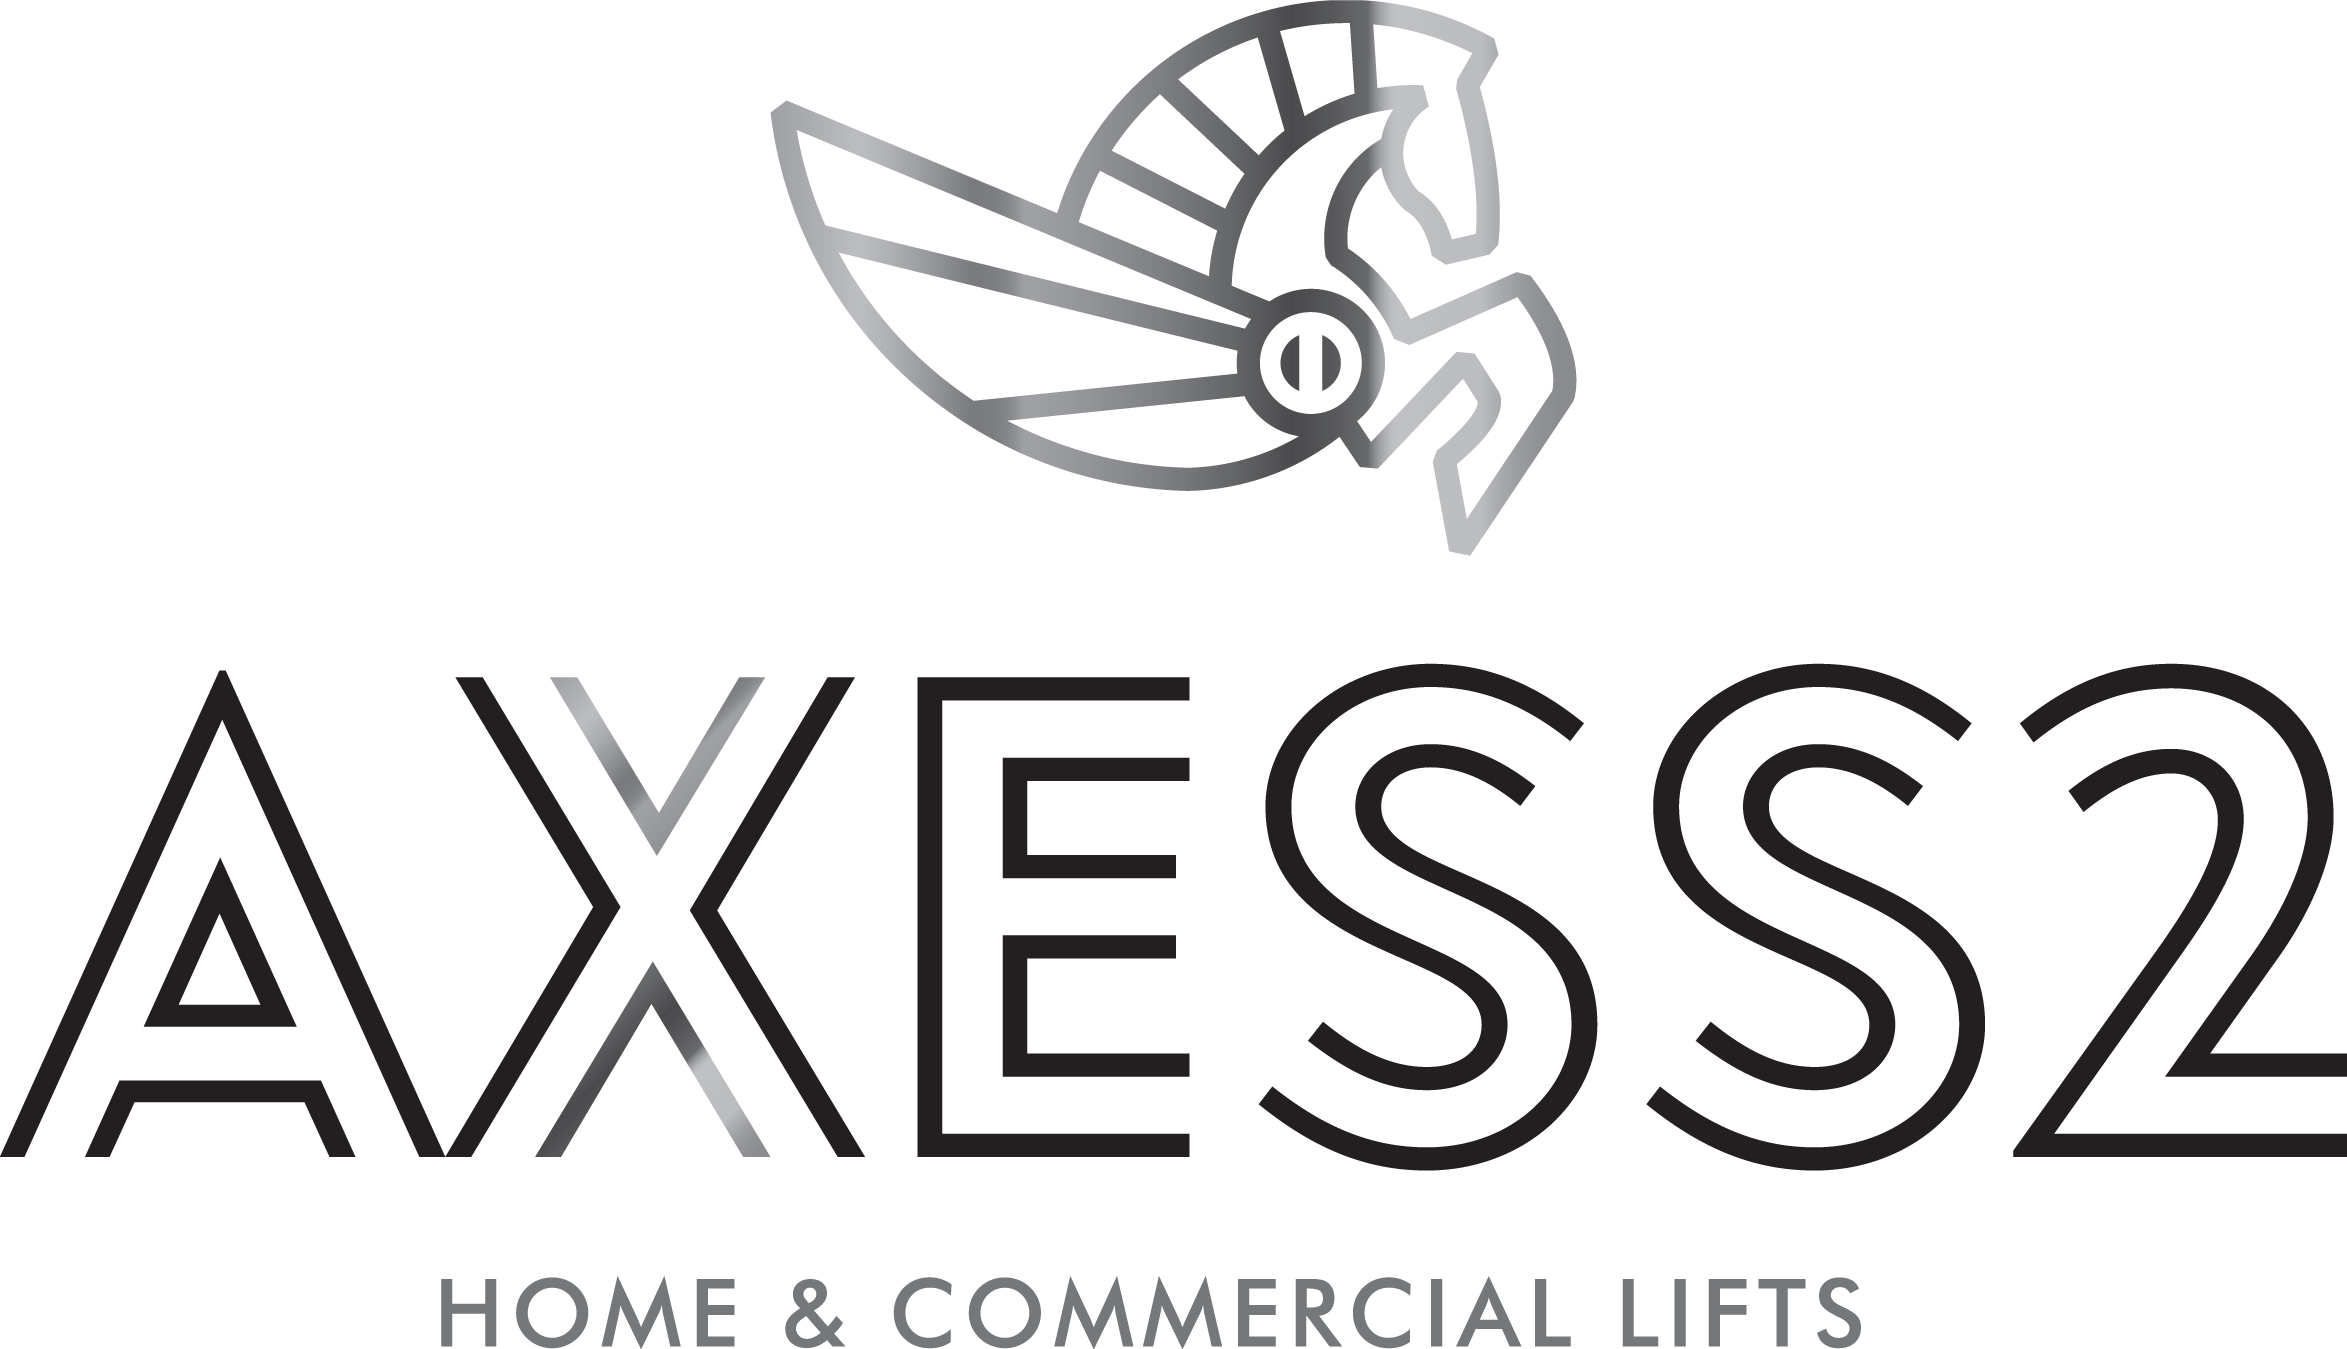 AXESS 2 Limited